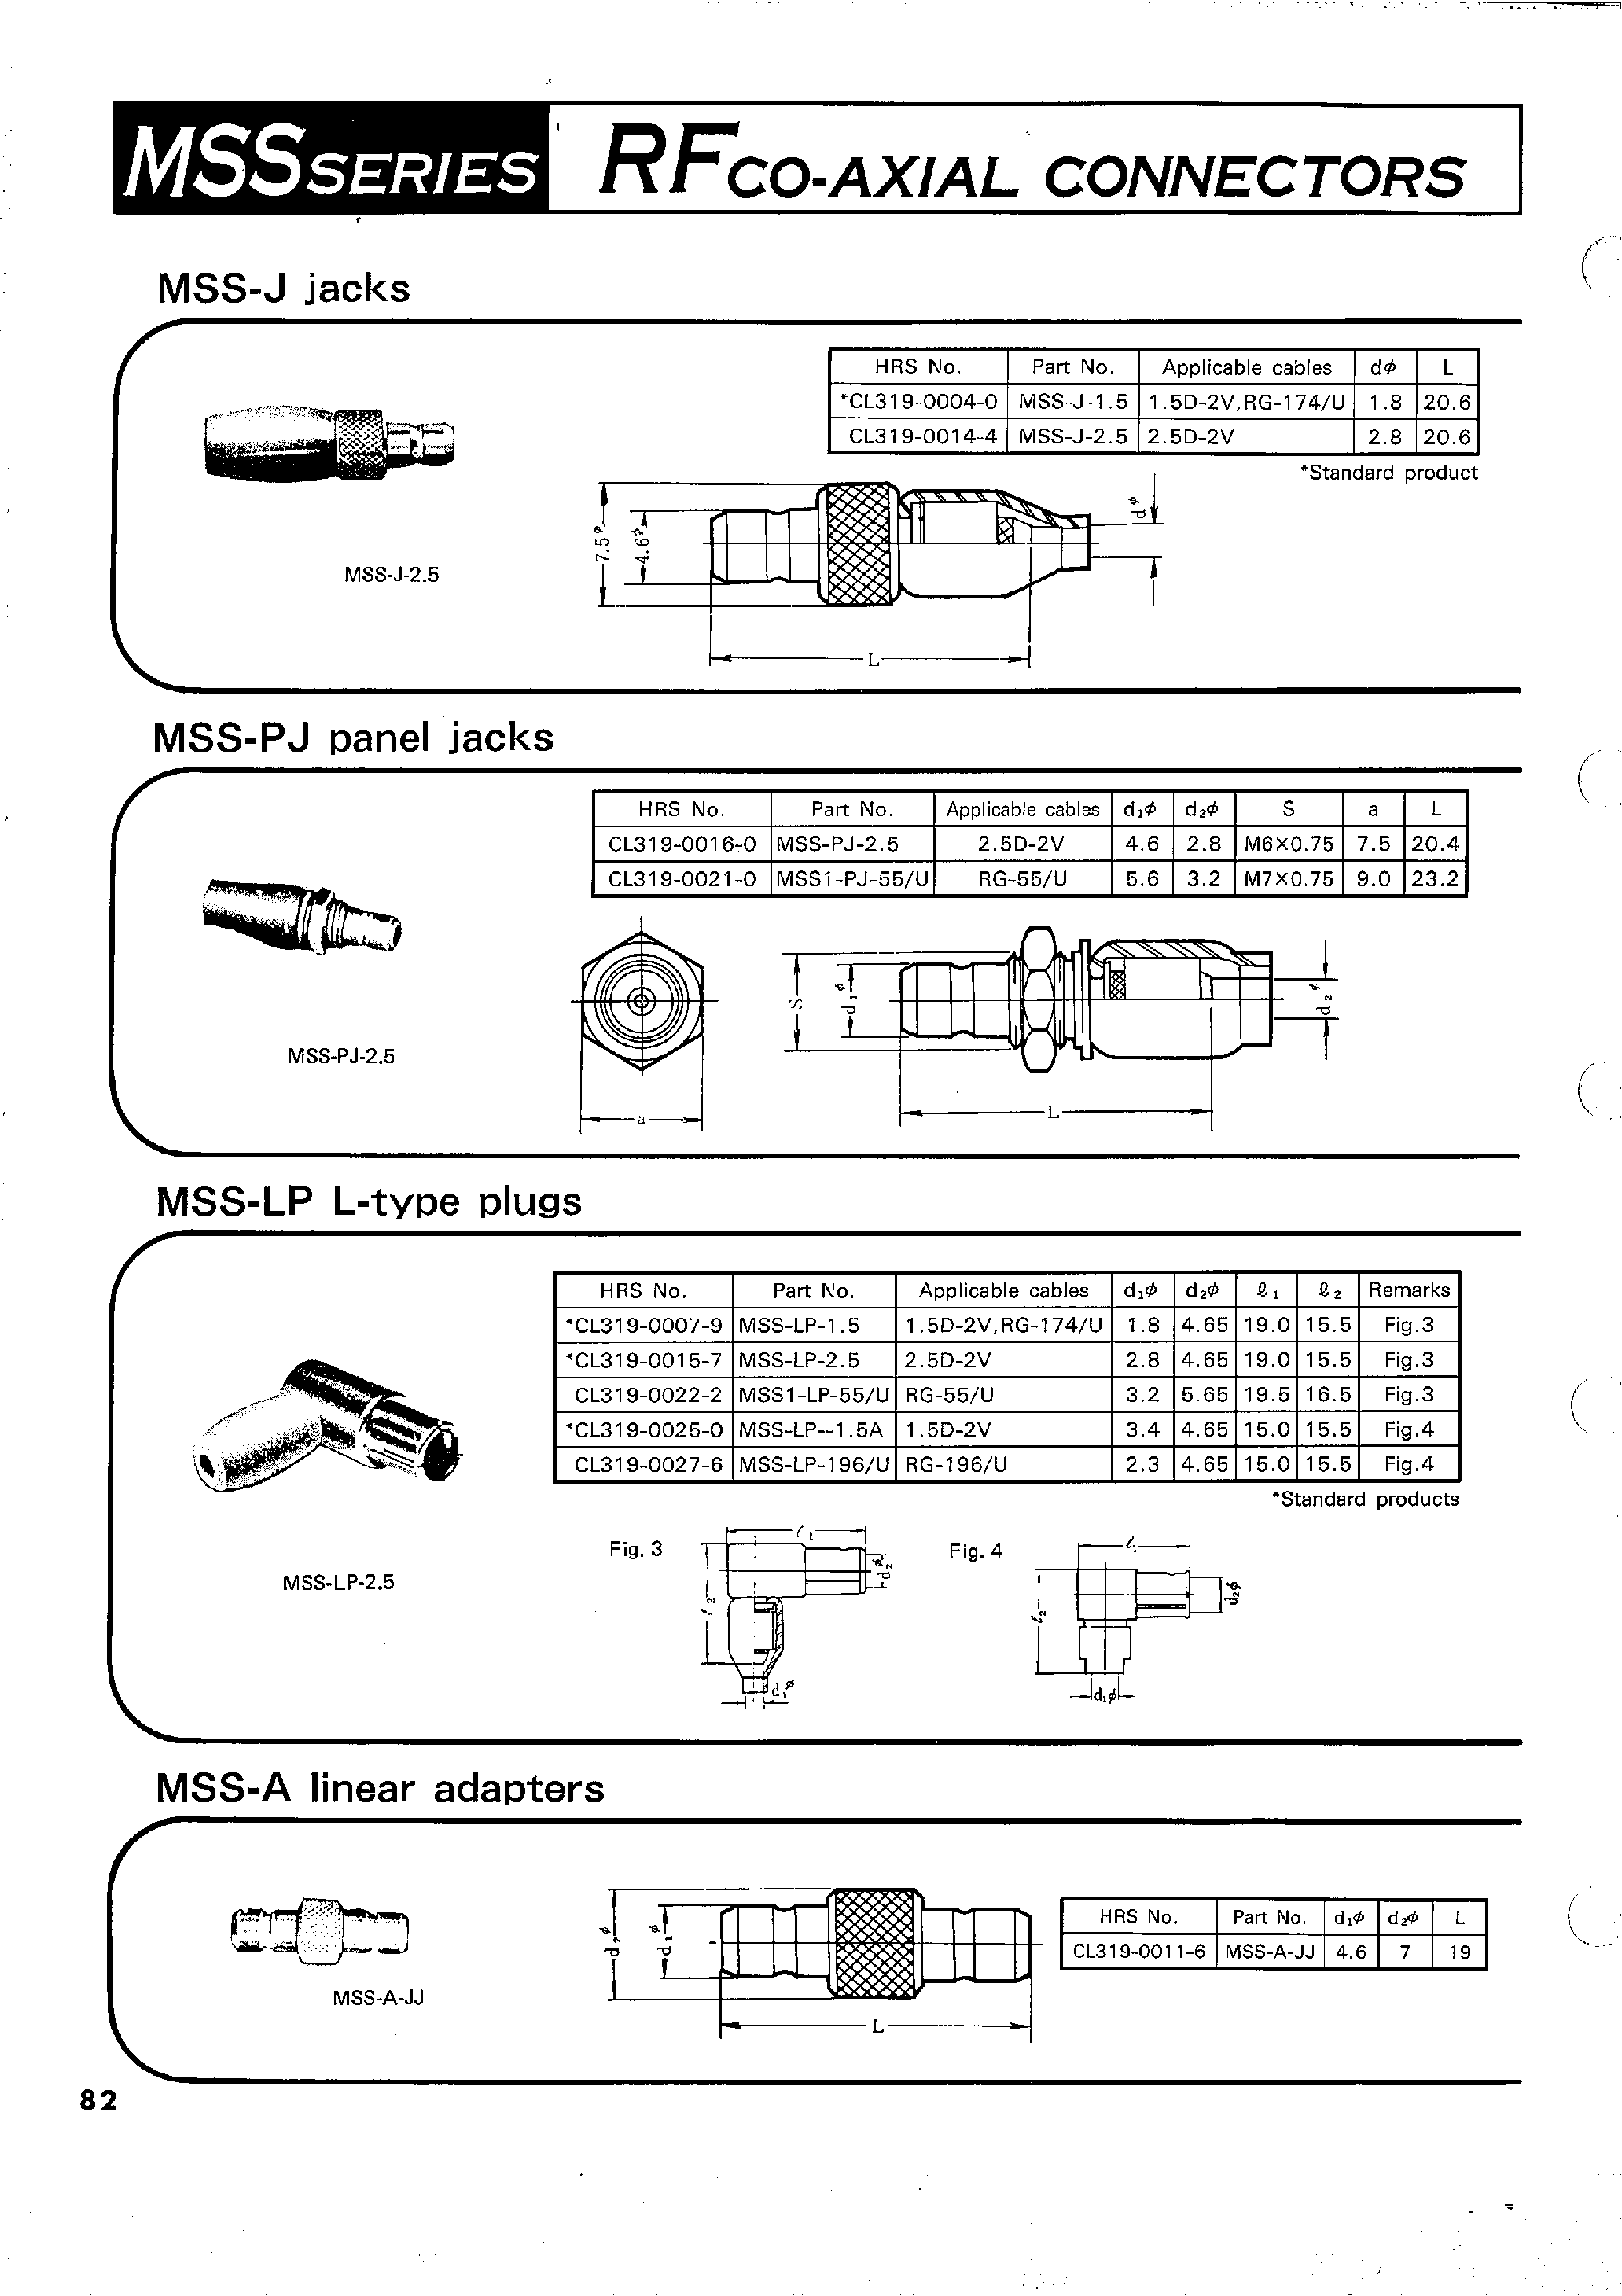 Datasheet CL319-0007-9 - RFCO-AXIAL CONNECTORS page 2